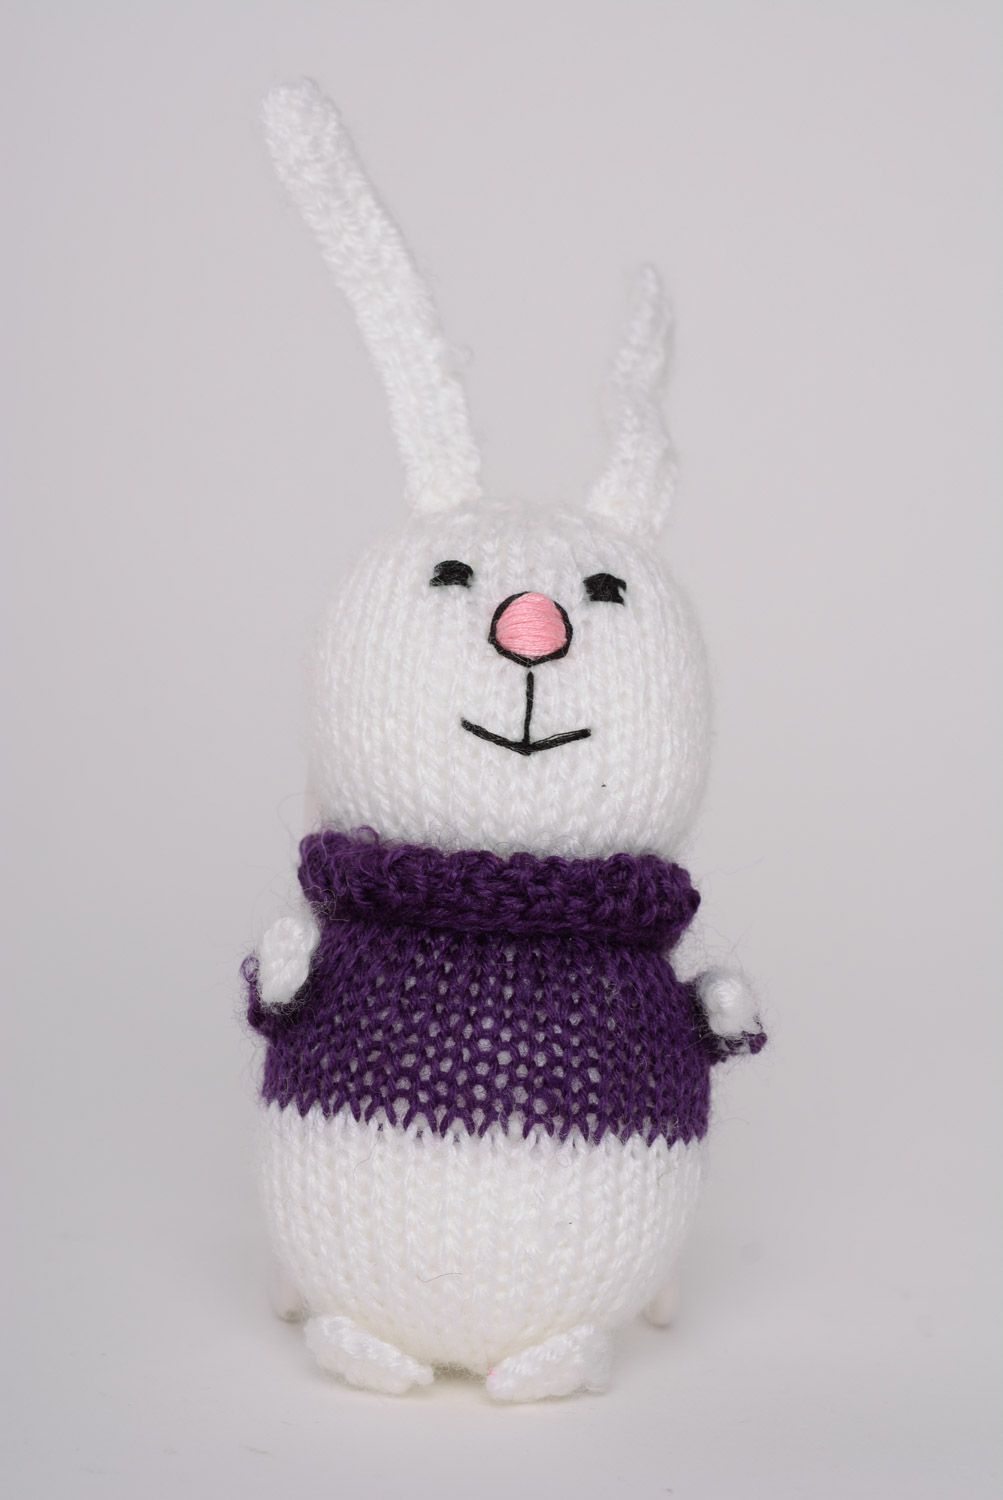 Handmade knitted soft toy white hare in violet sweater photo 1